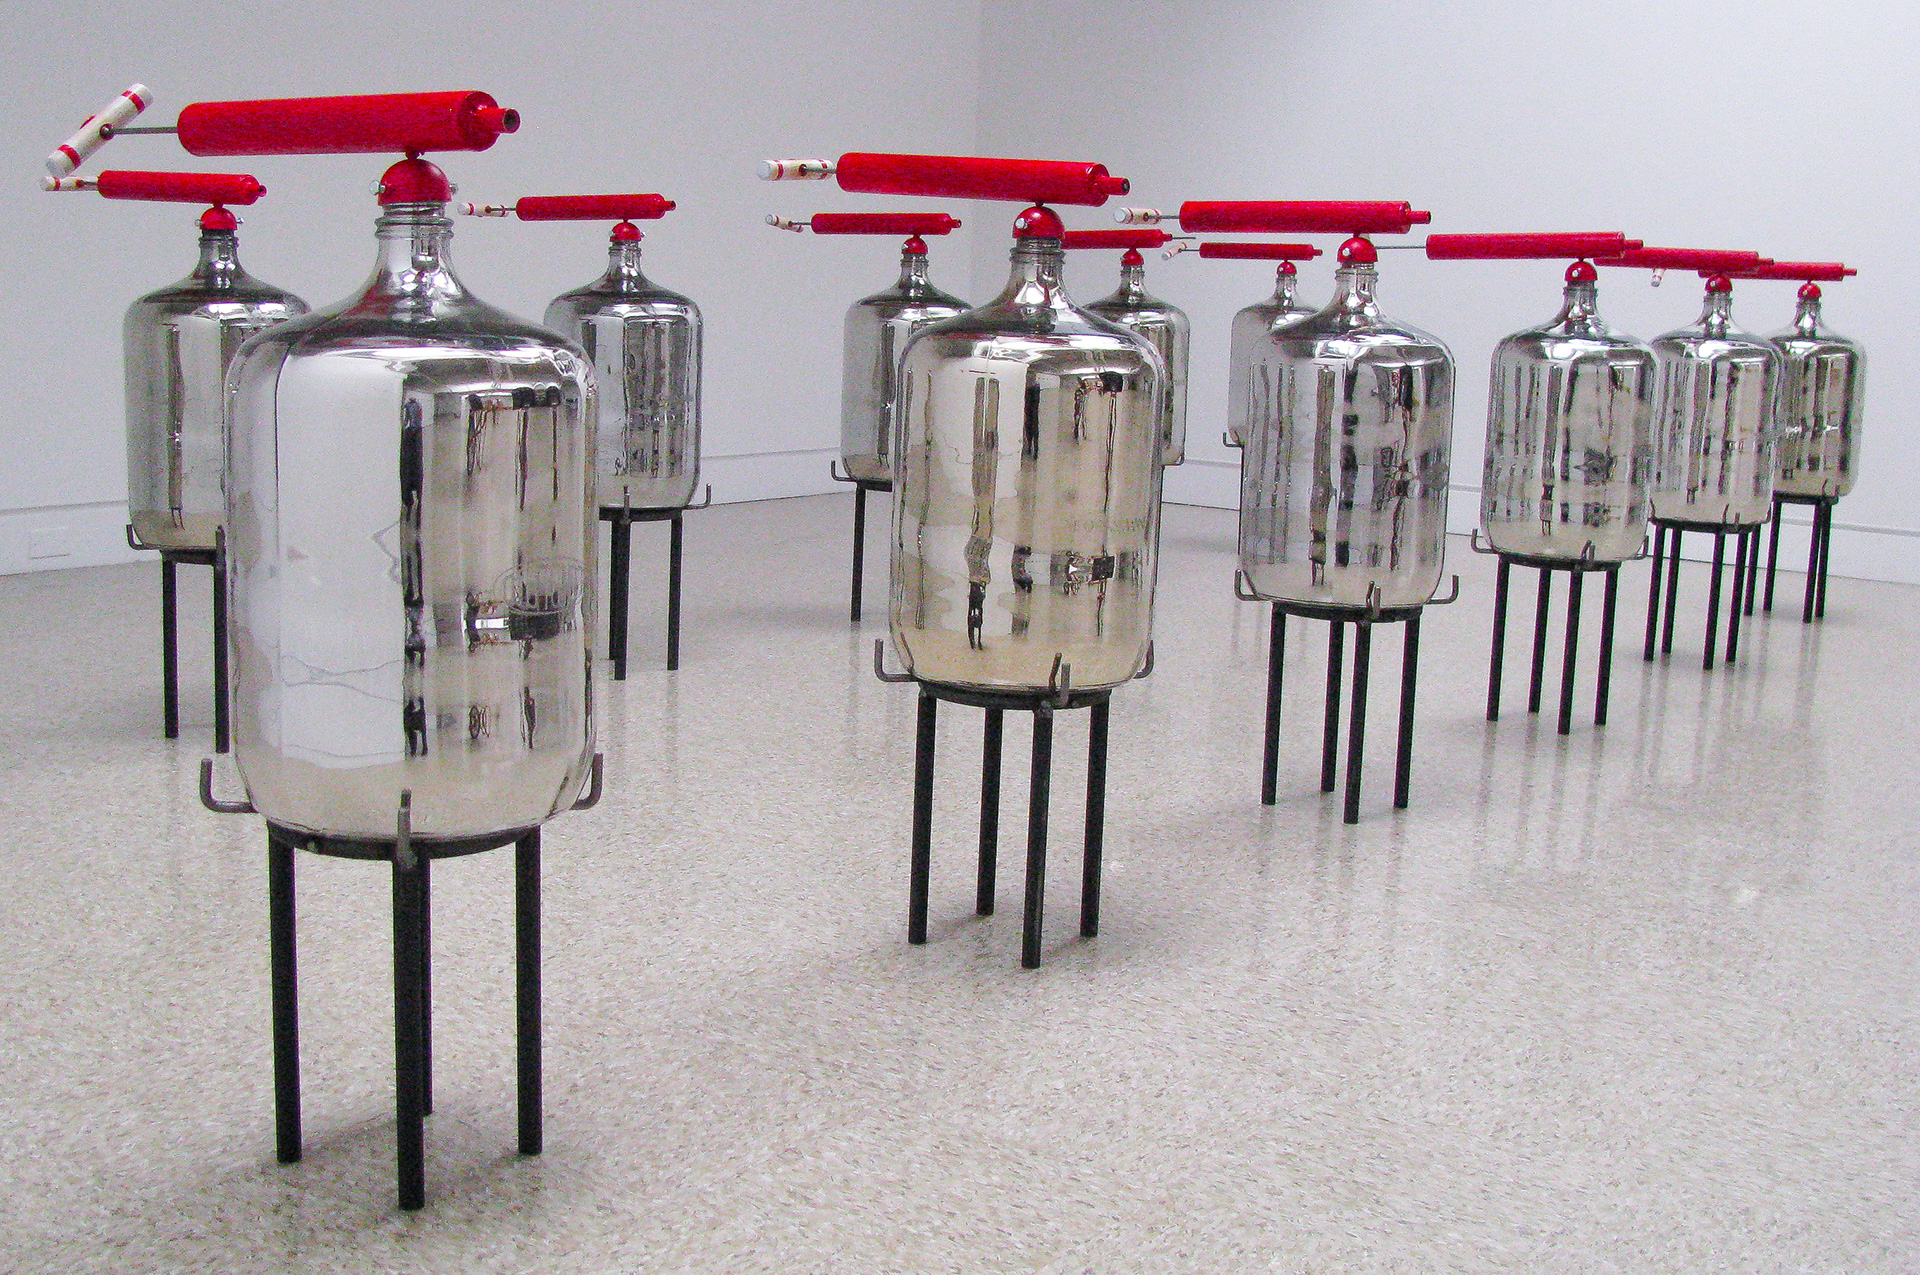 Installation of 12 silvered and engraved vessels with large red sprayer. 